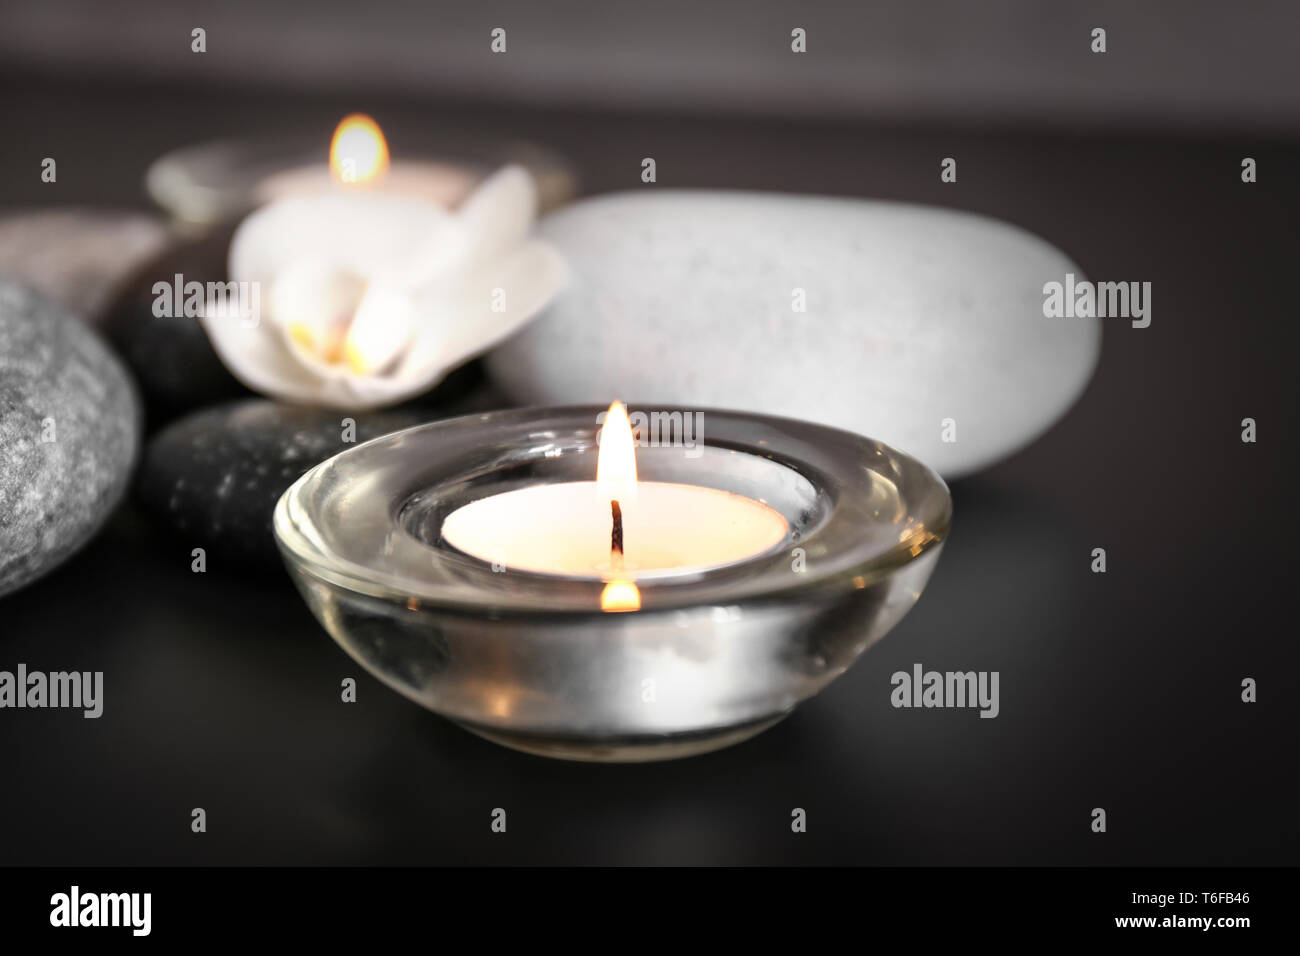 Burning candle and spa stones on black table Stock Photo